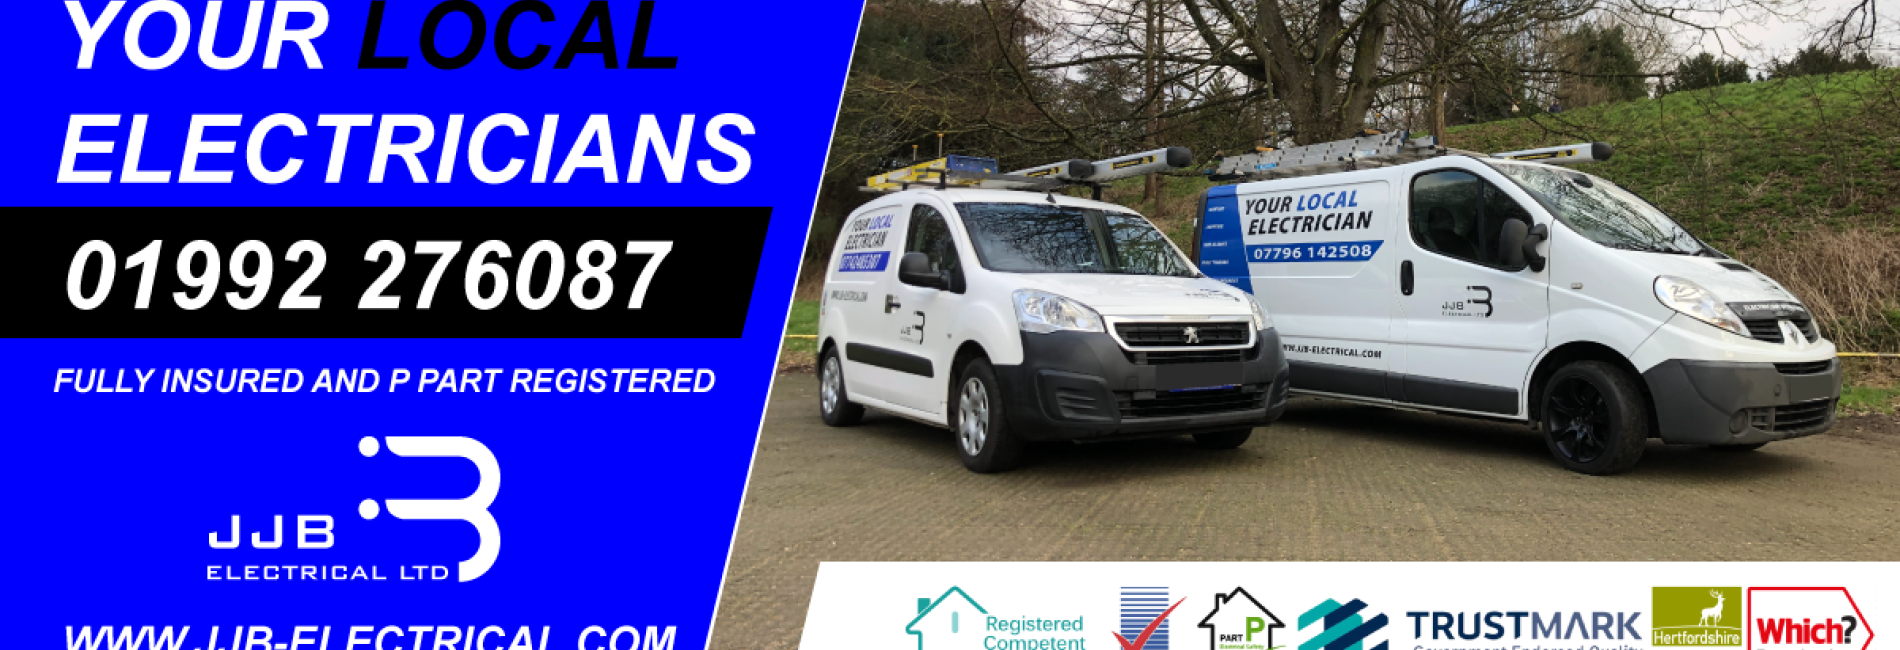 Electricians in cheshunt 